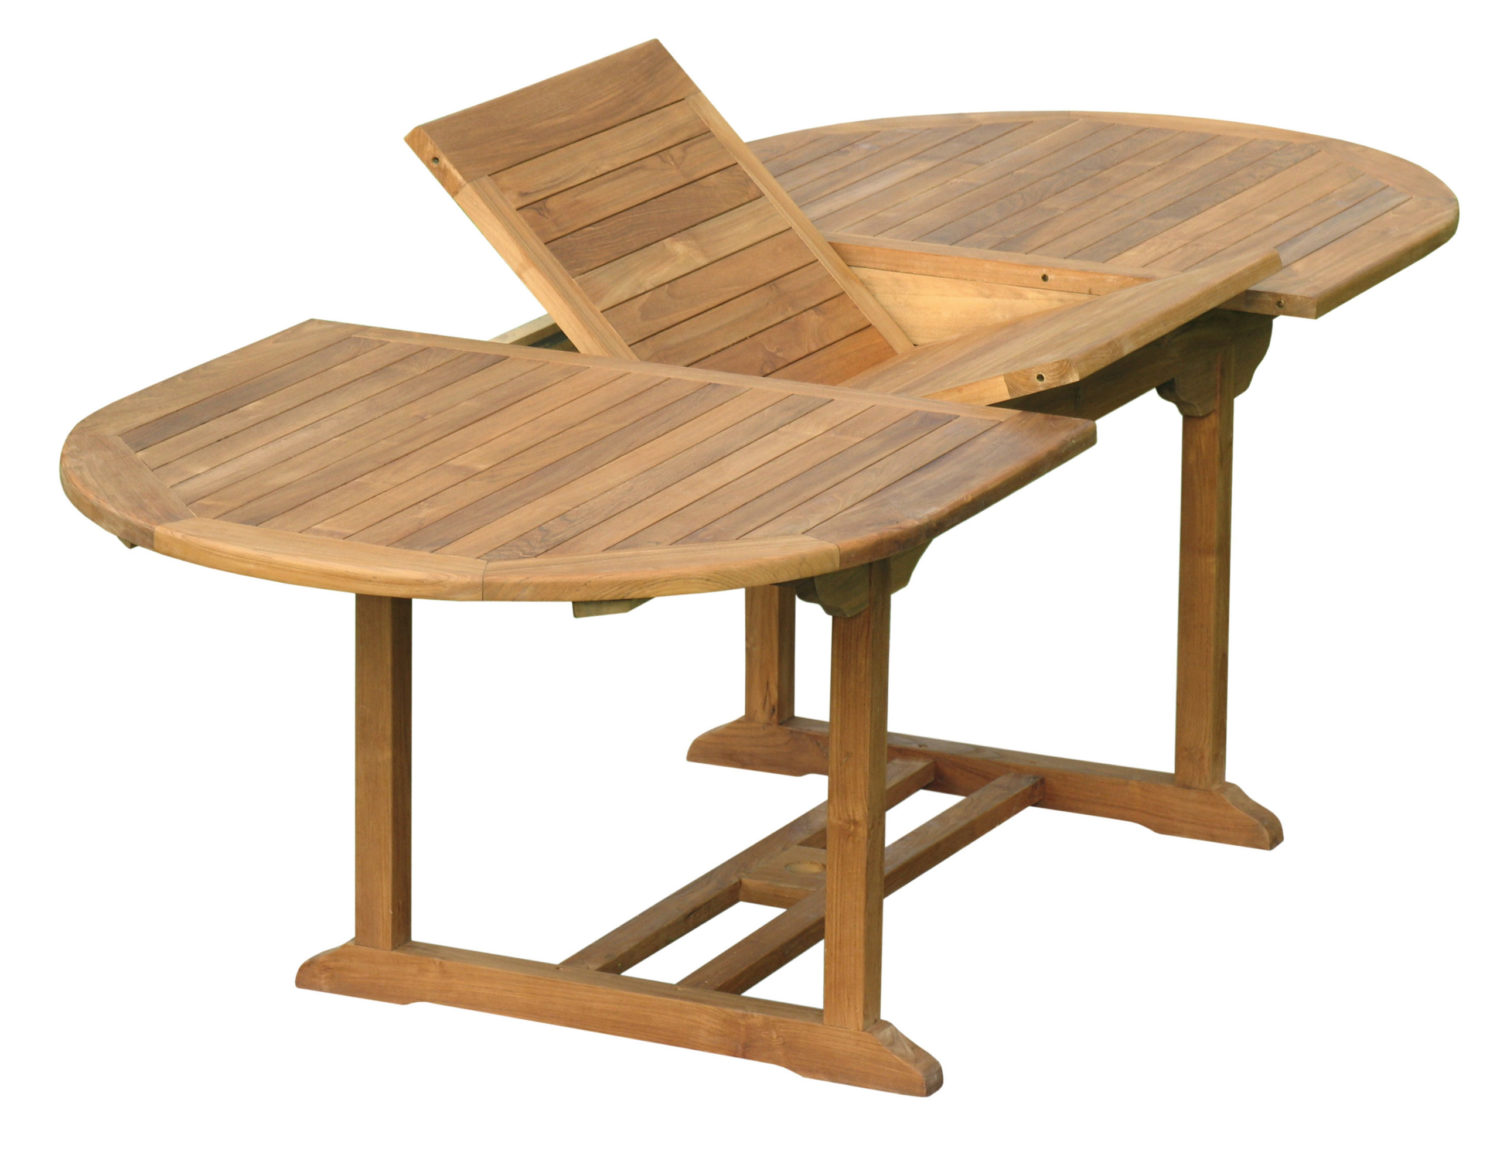 Classic Teak Extension Table 57 77 On Sale Now At Atlantic Patio